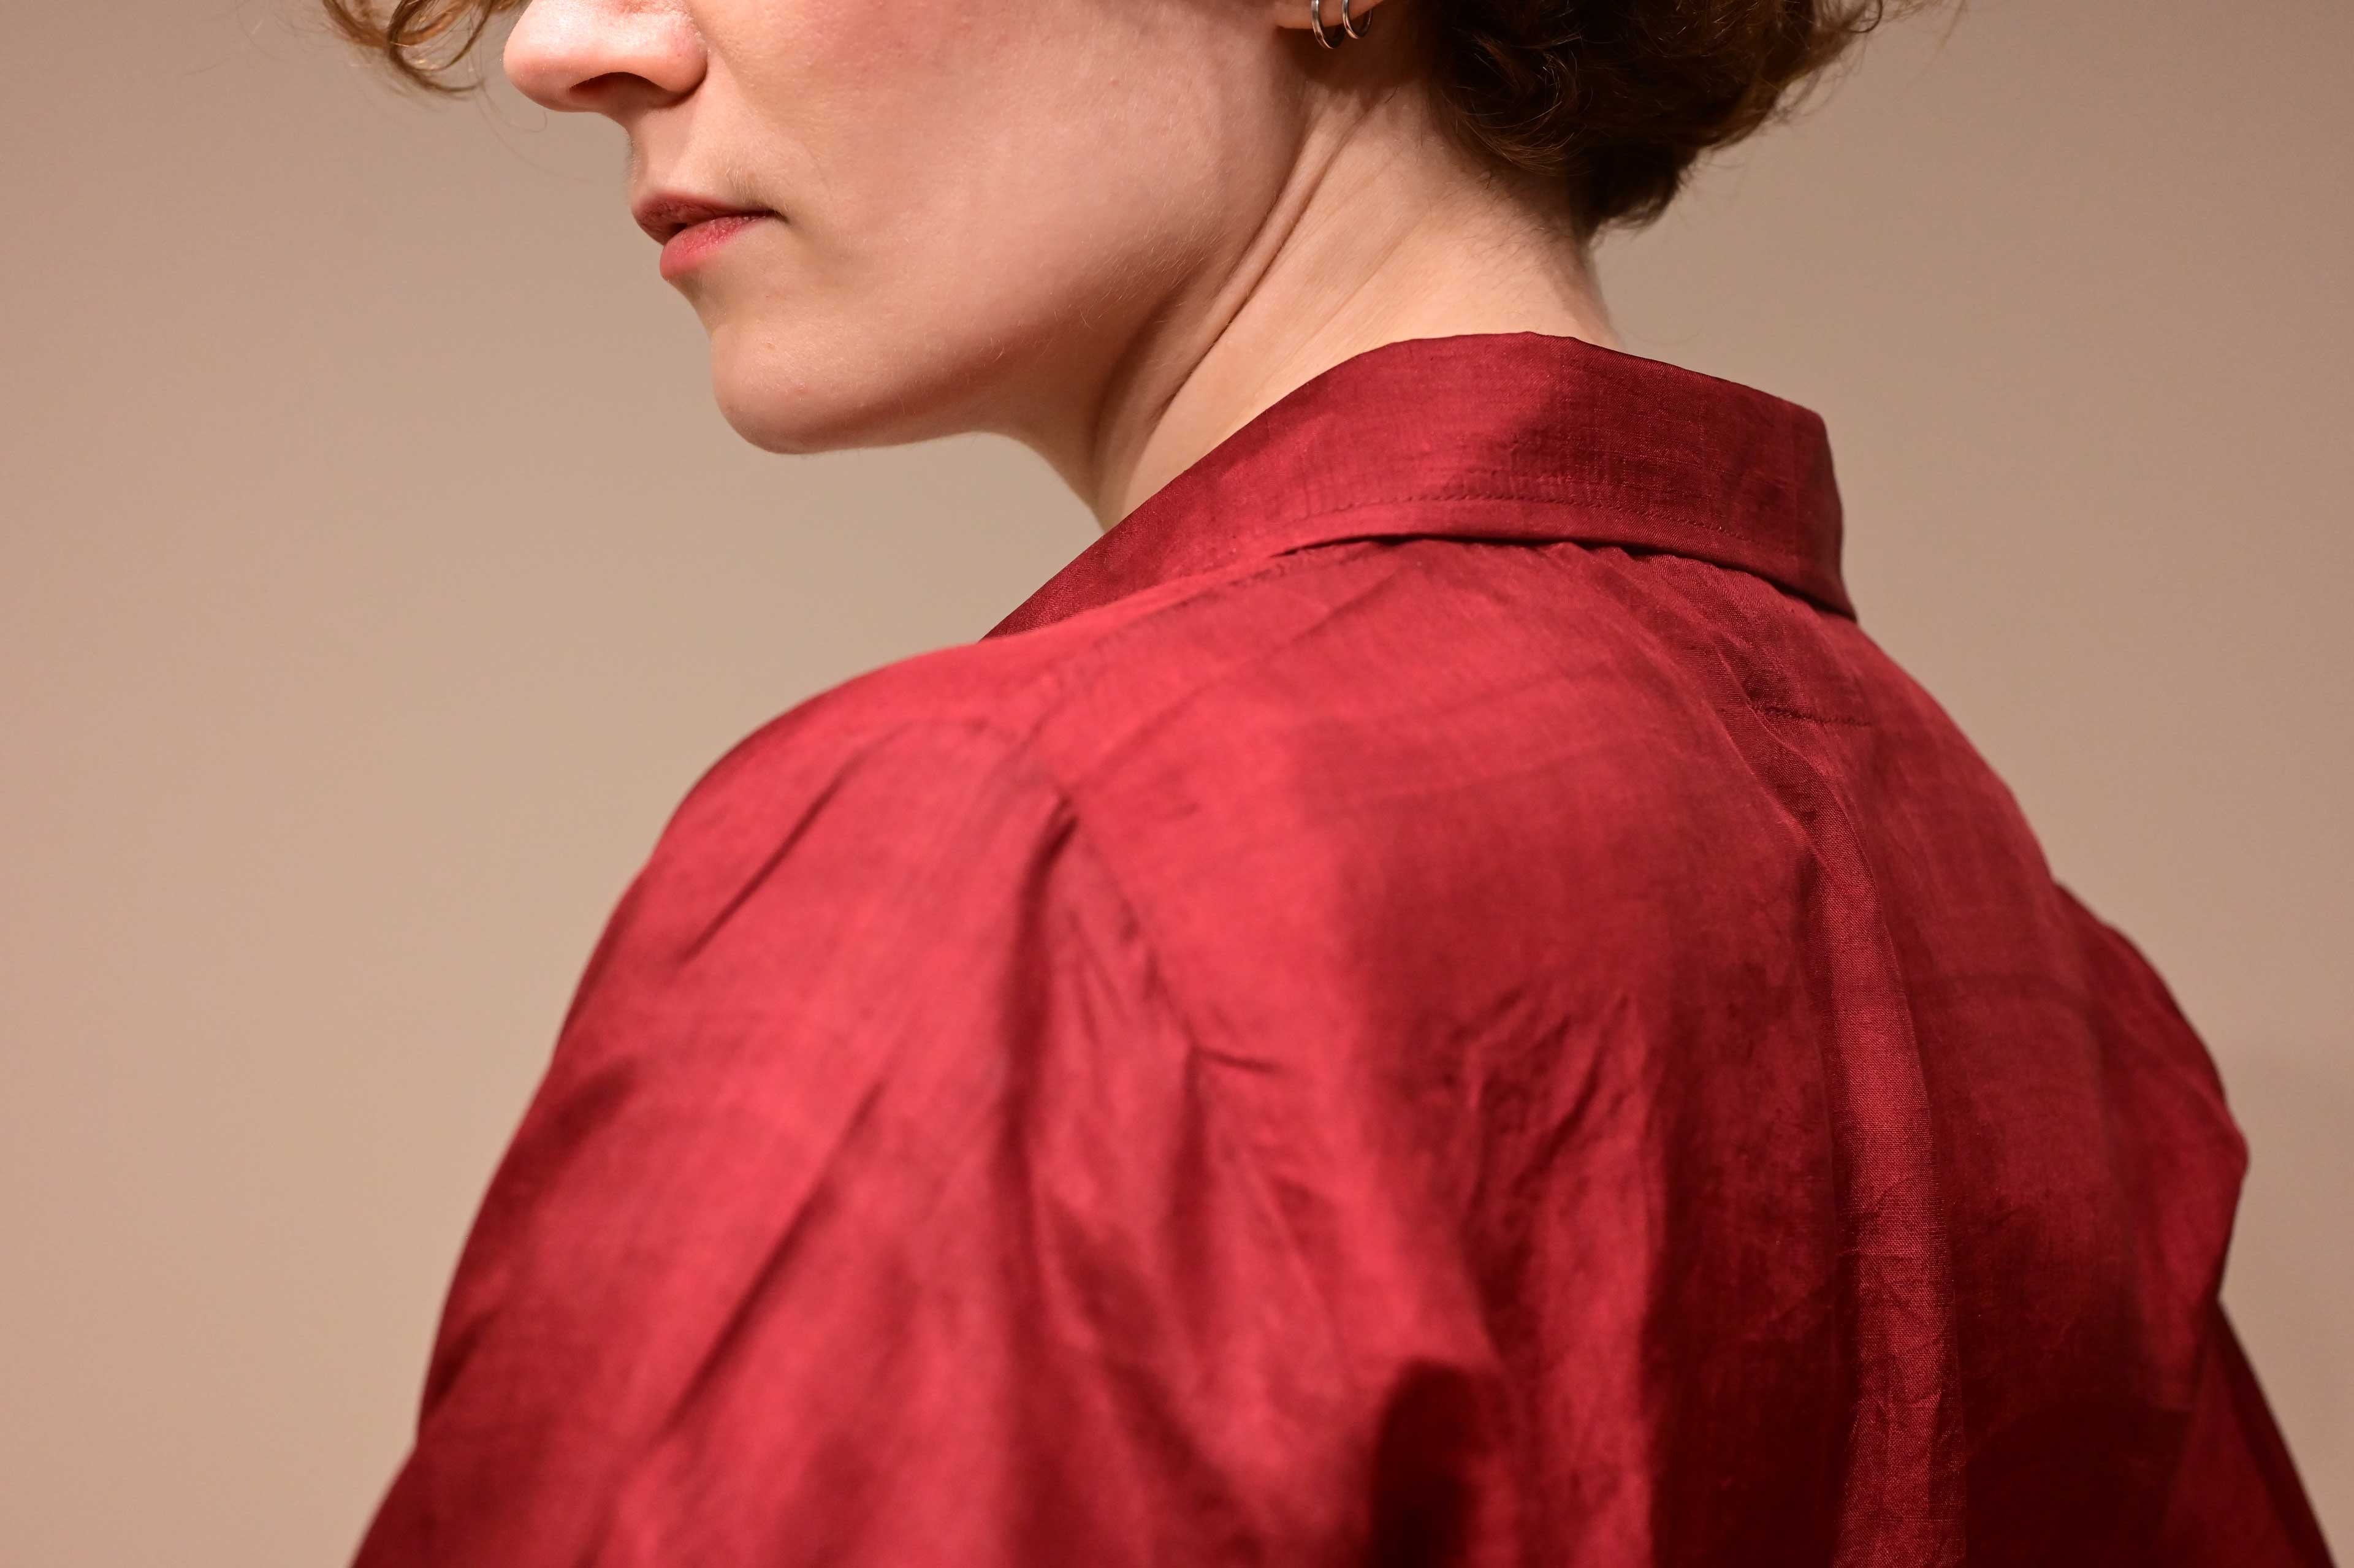 partial face and back of a european caucasian women wearing a red silk formal shirt.